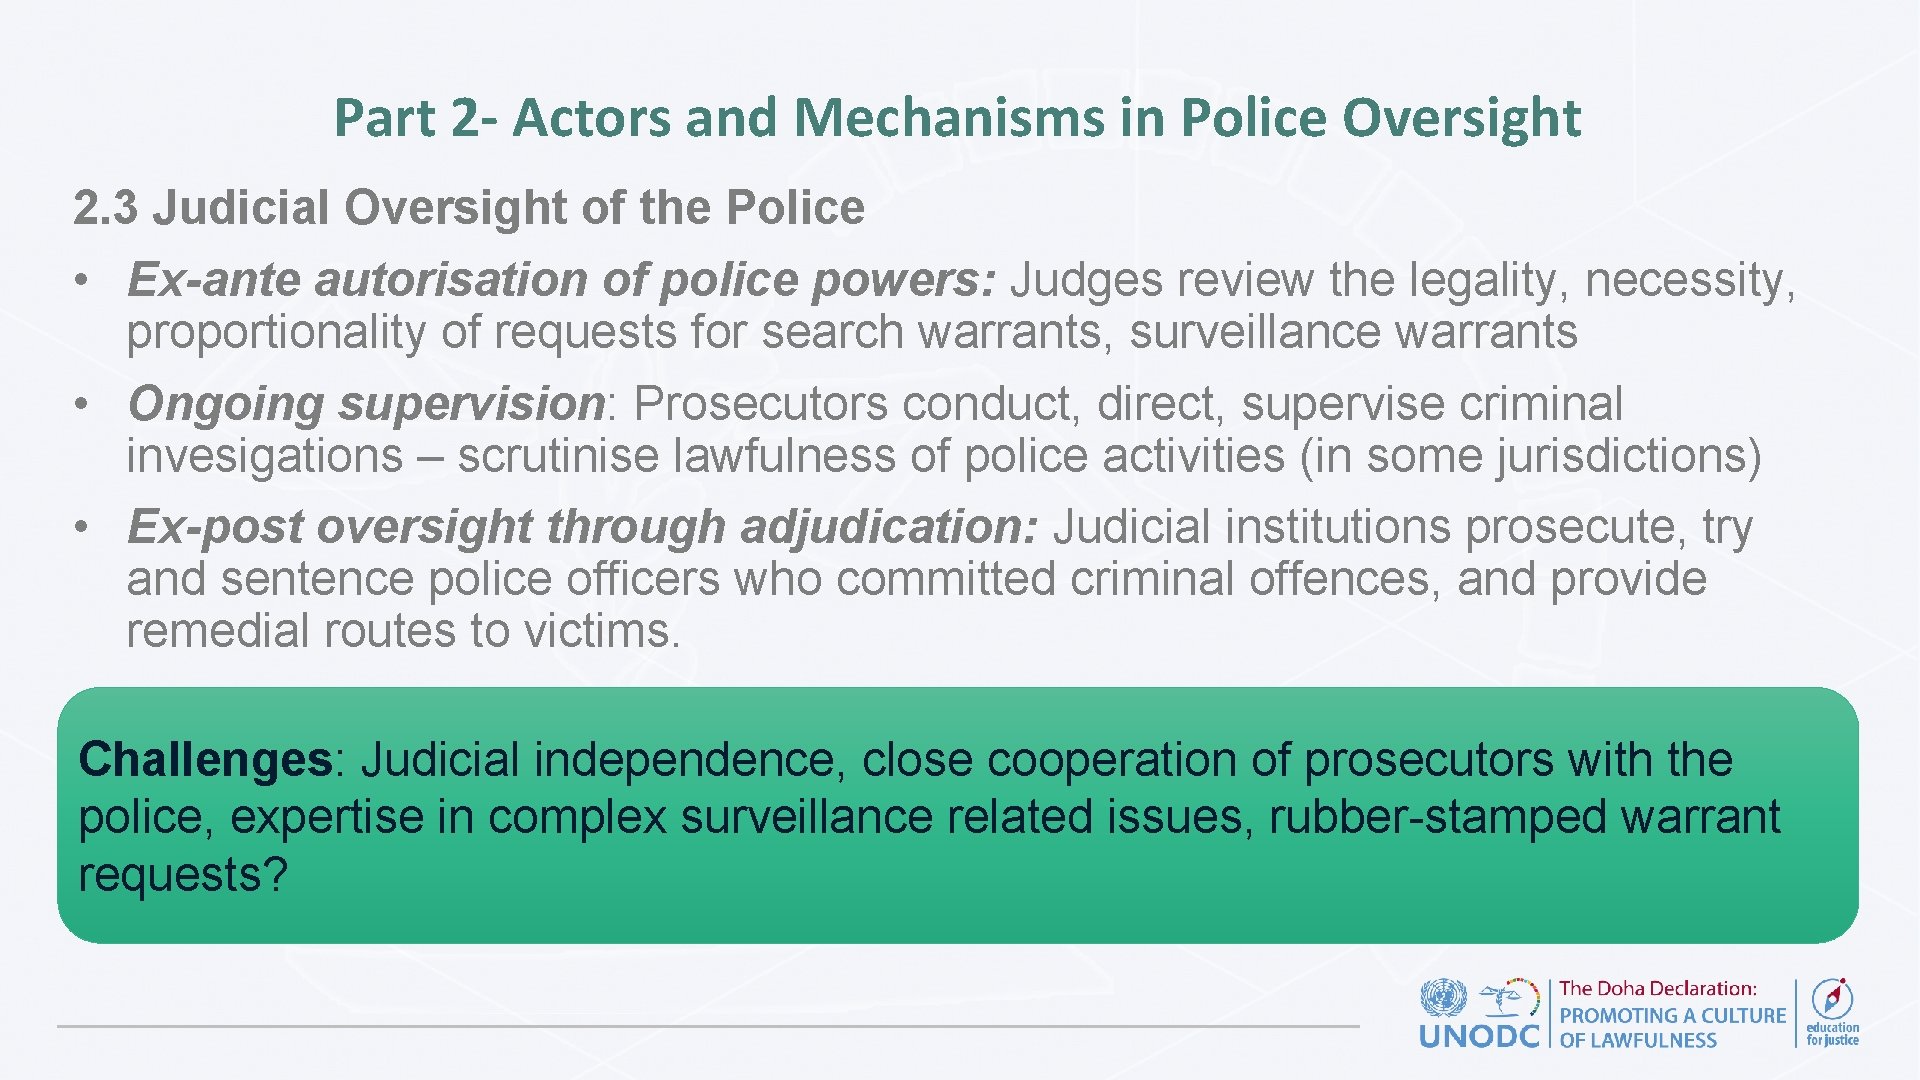 Part 2 - Actors and Mechanisms in Police Oversight 2. 3 Judicial Oversight of